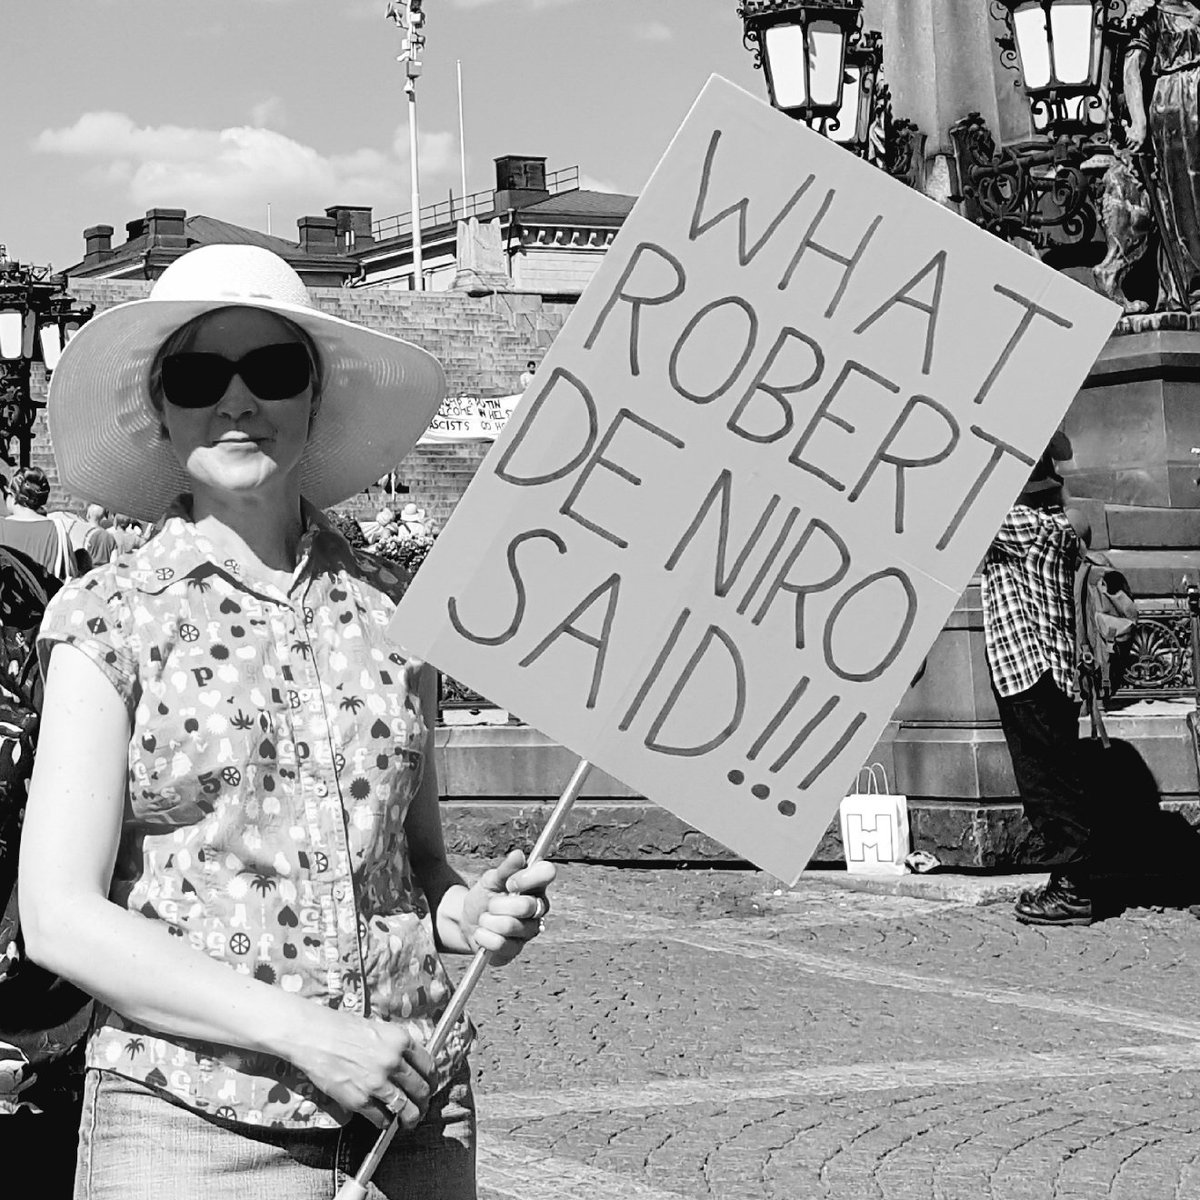 QT with a black and white photo of yourself

One from the archive.
One hot day in Helsinki.
One passionate woman.
One for the grandkids.
(One day, maybe.)

-Senate Square 2018- https://t.co/NaWpU0T4Vc https://t.co/D1JJwNeeiW